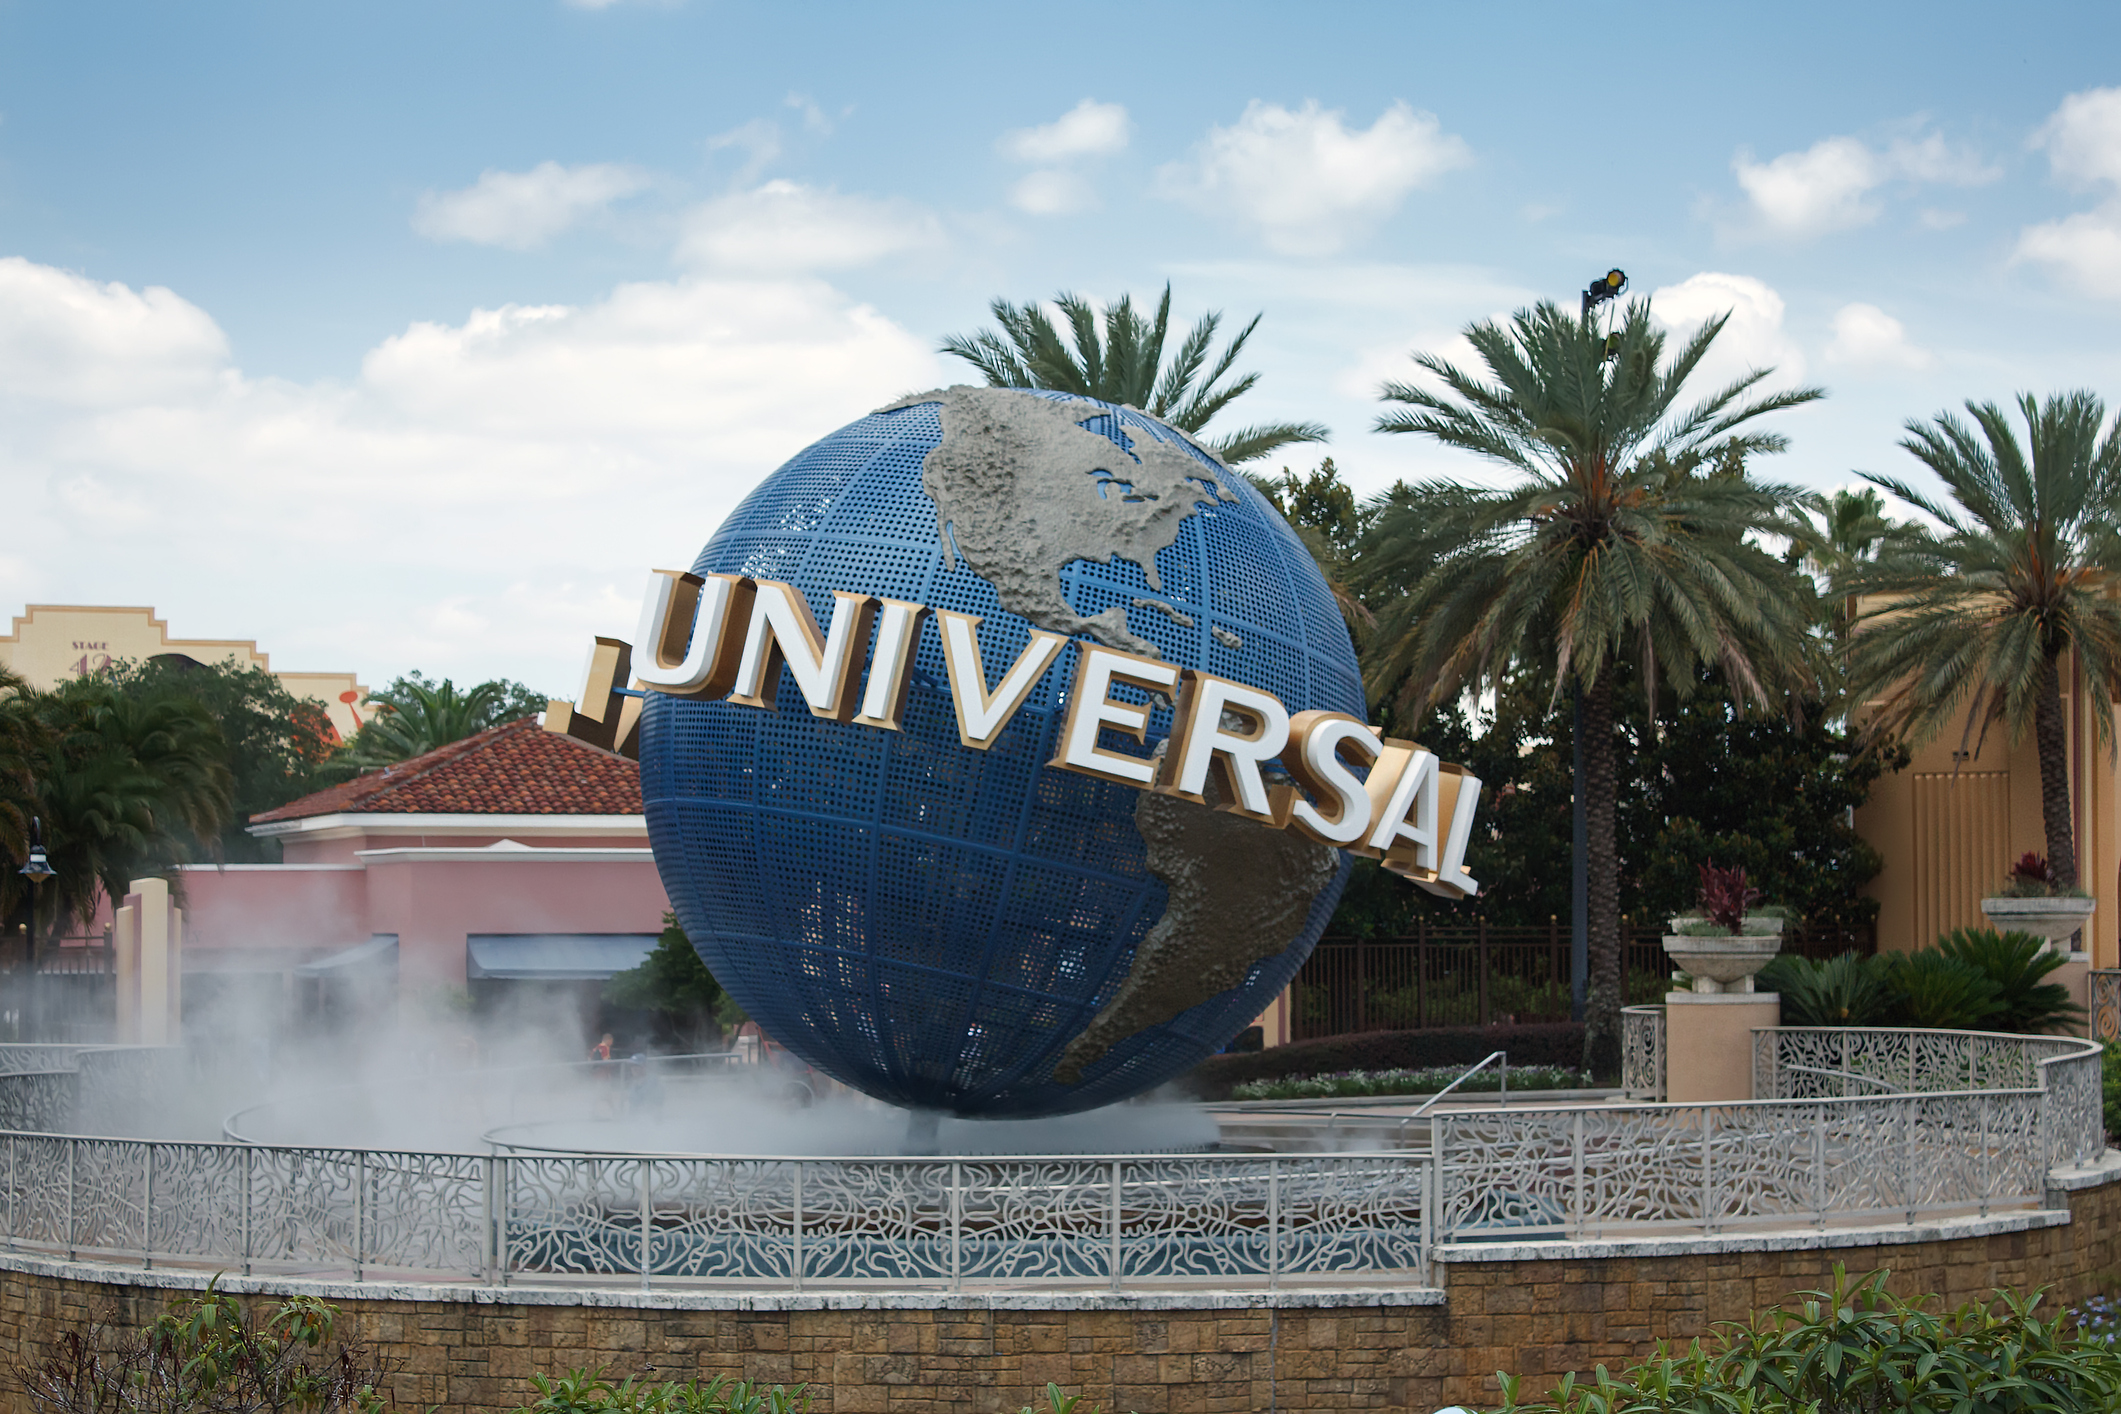 Disney World’s Governing District Abolishes Diversity Programs: A Shift in Policy and Priorities